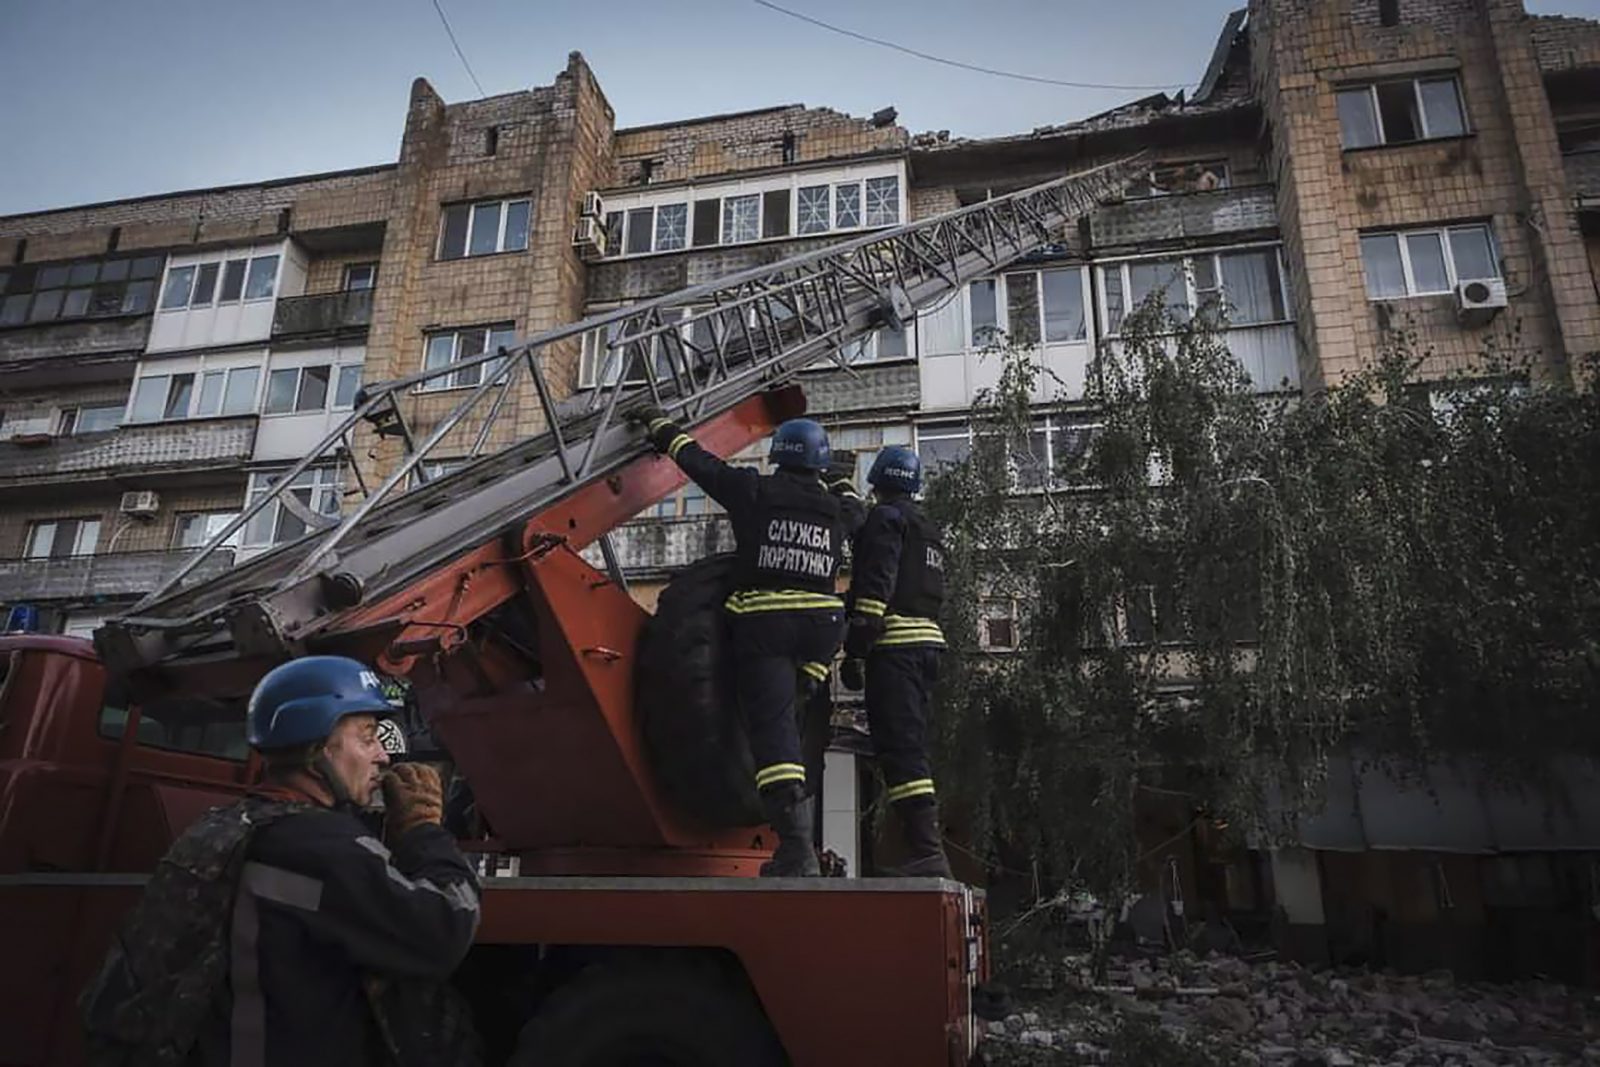 epa10789589 A handout photo made available by the State Emergency Service shows Ukrainian rescuers working on a site where a rocket hit the city of Pokrovsk, Donetsk area, Ukraine, 07 August 2023, amid the Russian invasion. At least five people died and 31 were injured after two rockets hit a residential building and a hotel downtown, according to a National Police report. Russian troops entered Ukrainian territory in February 2022, starting a conflict that has provoked destruction and a humanitarian crisis.  EPA/STATE EMERGENCY SERVICE HANDOUT HANDOUT  HANDOUT EDITORIAL USE ONLY/NO SALES